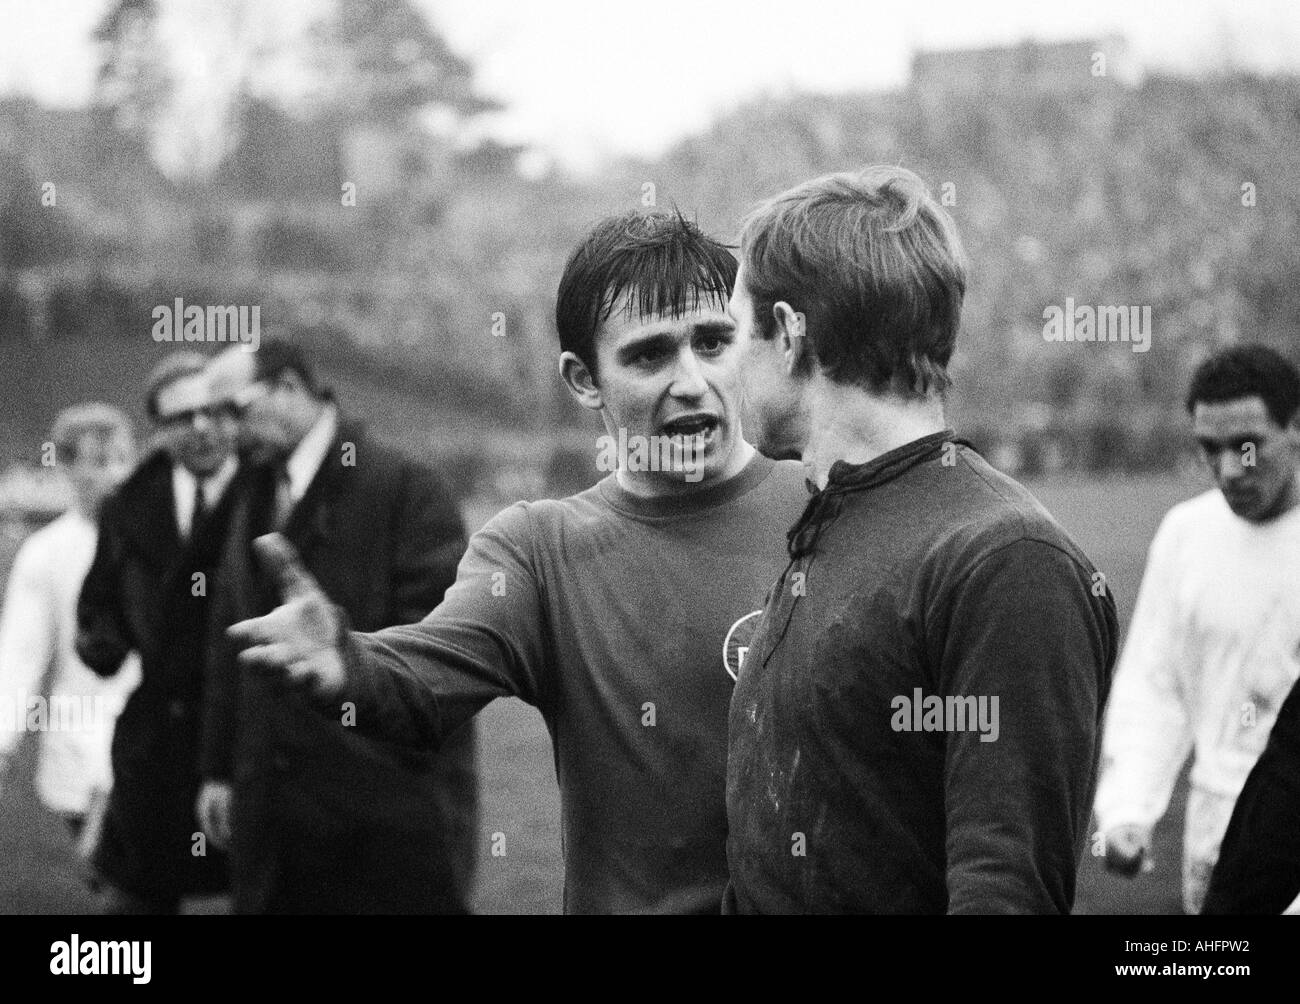 football players leaving the pitch, Karl Heinz Ferschl (Nuernberg) left ahead in discussion with keeper Roland Wabra (Nuernberg), left behind coach Max Merkel (Nuernberg), right behind Werner Waddey (MG) Stock Photo